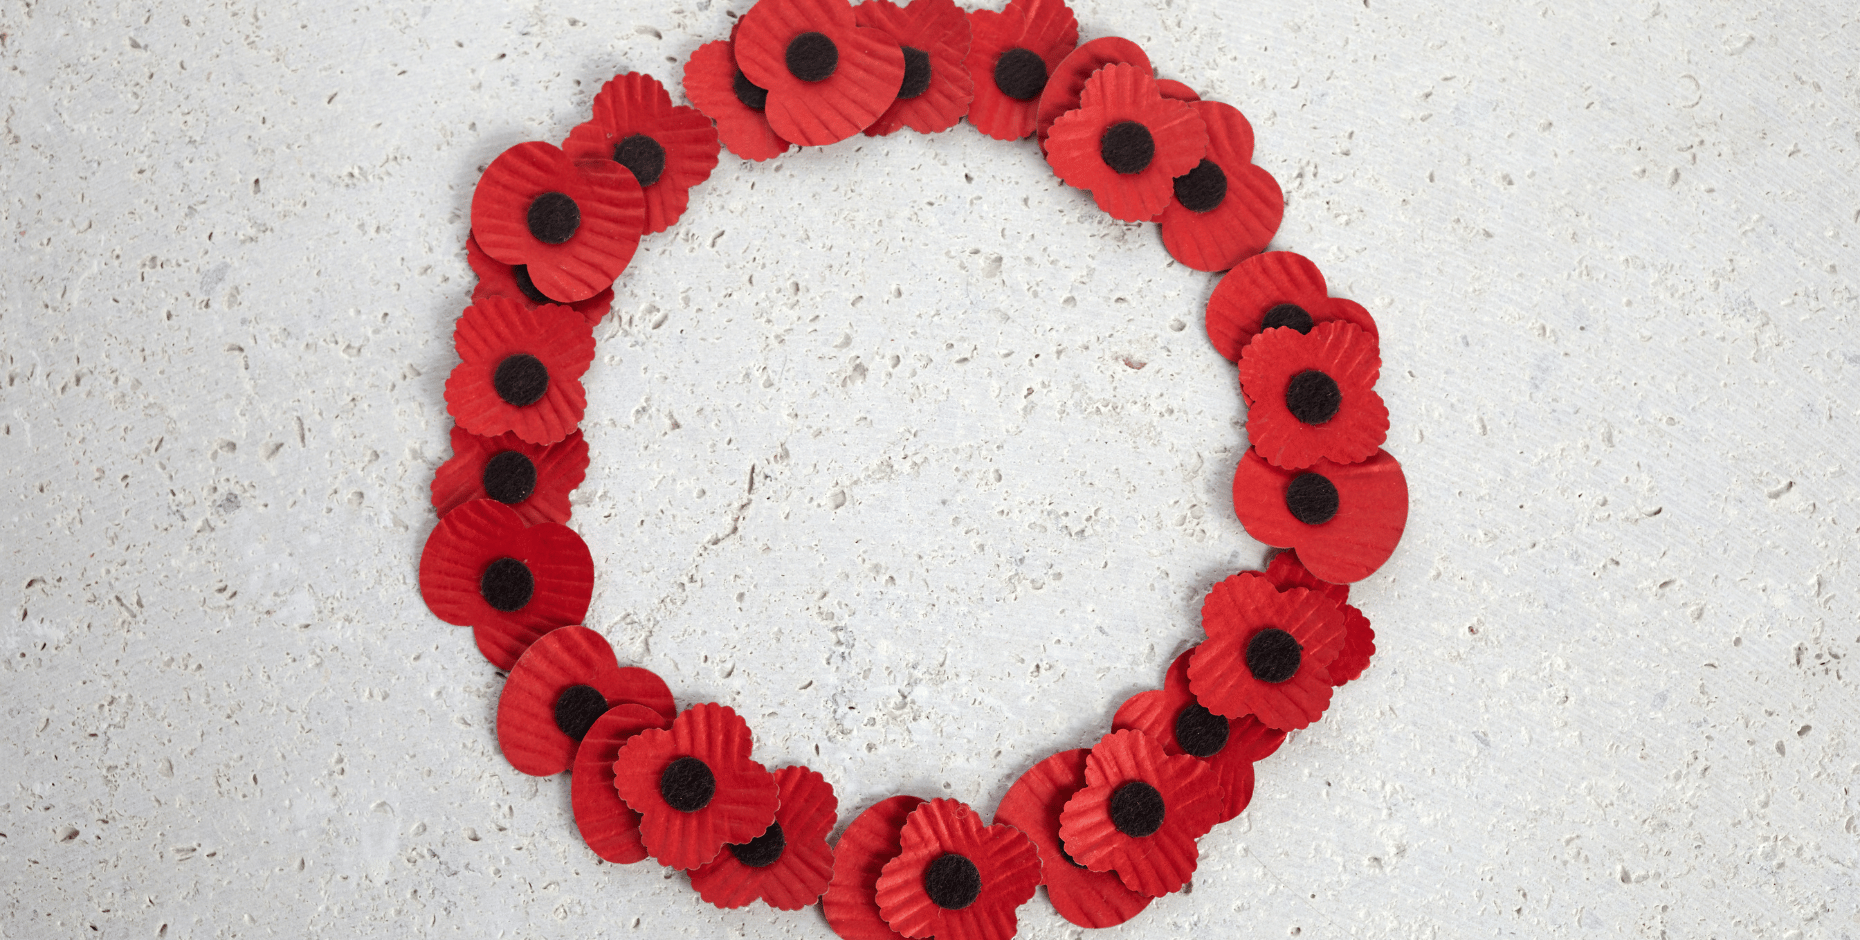 A plain background with a ring of red poppies in the center of the the image